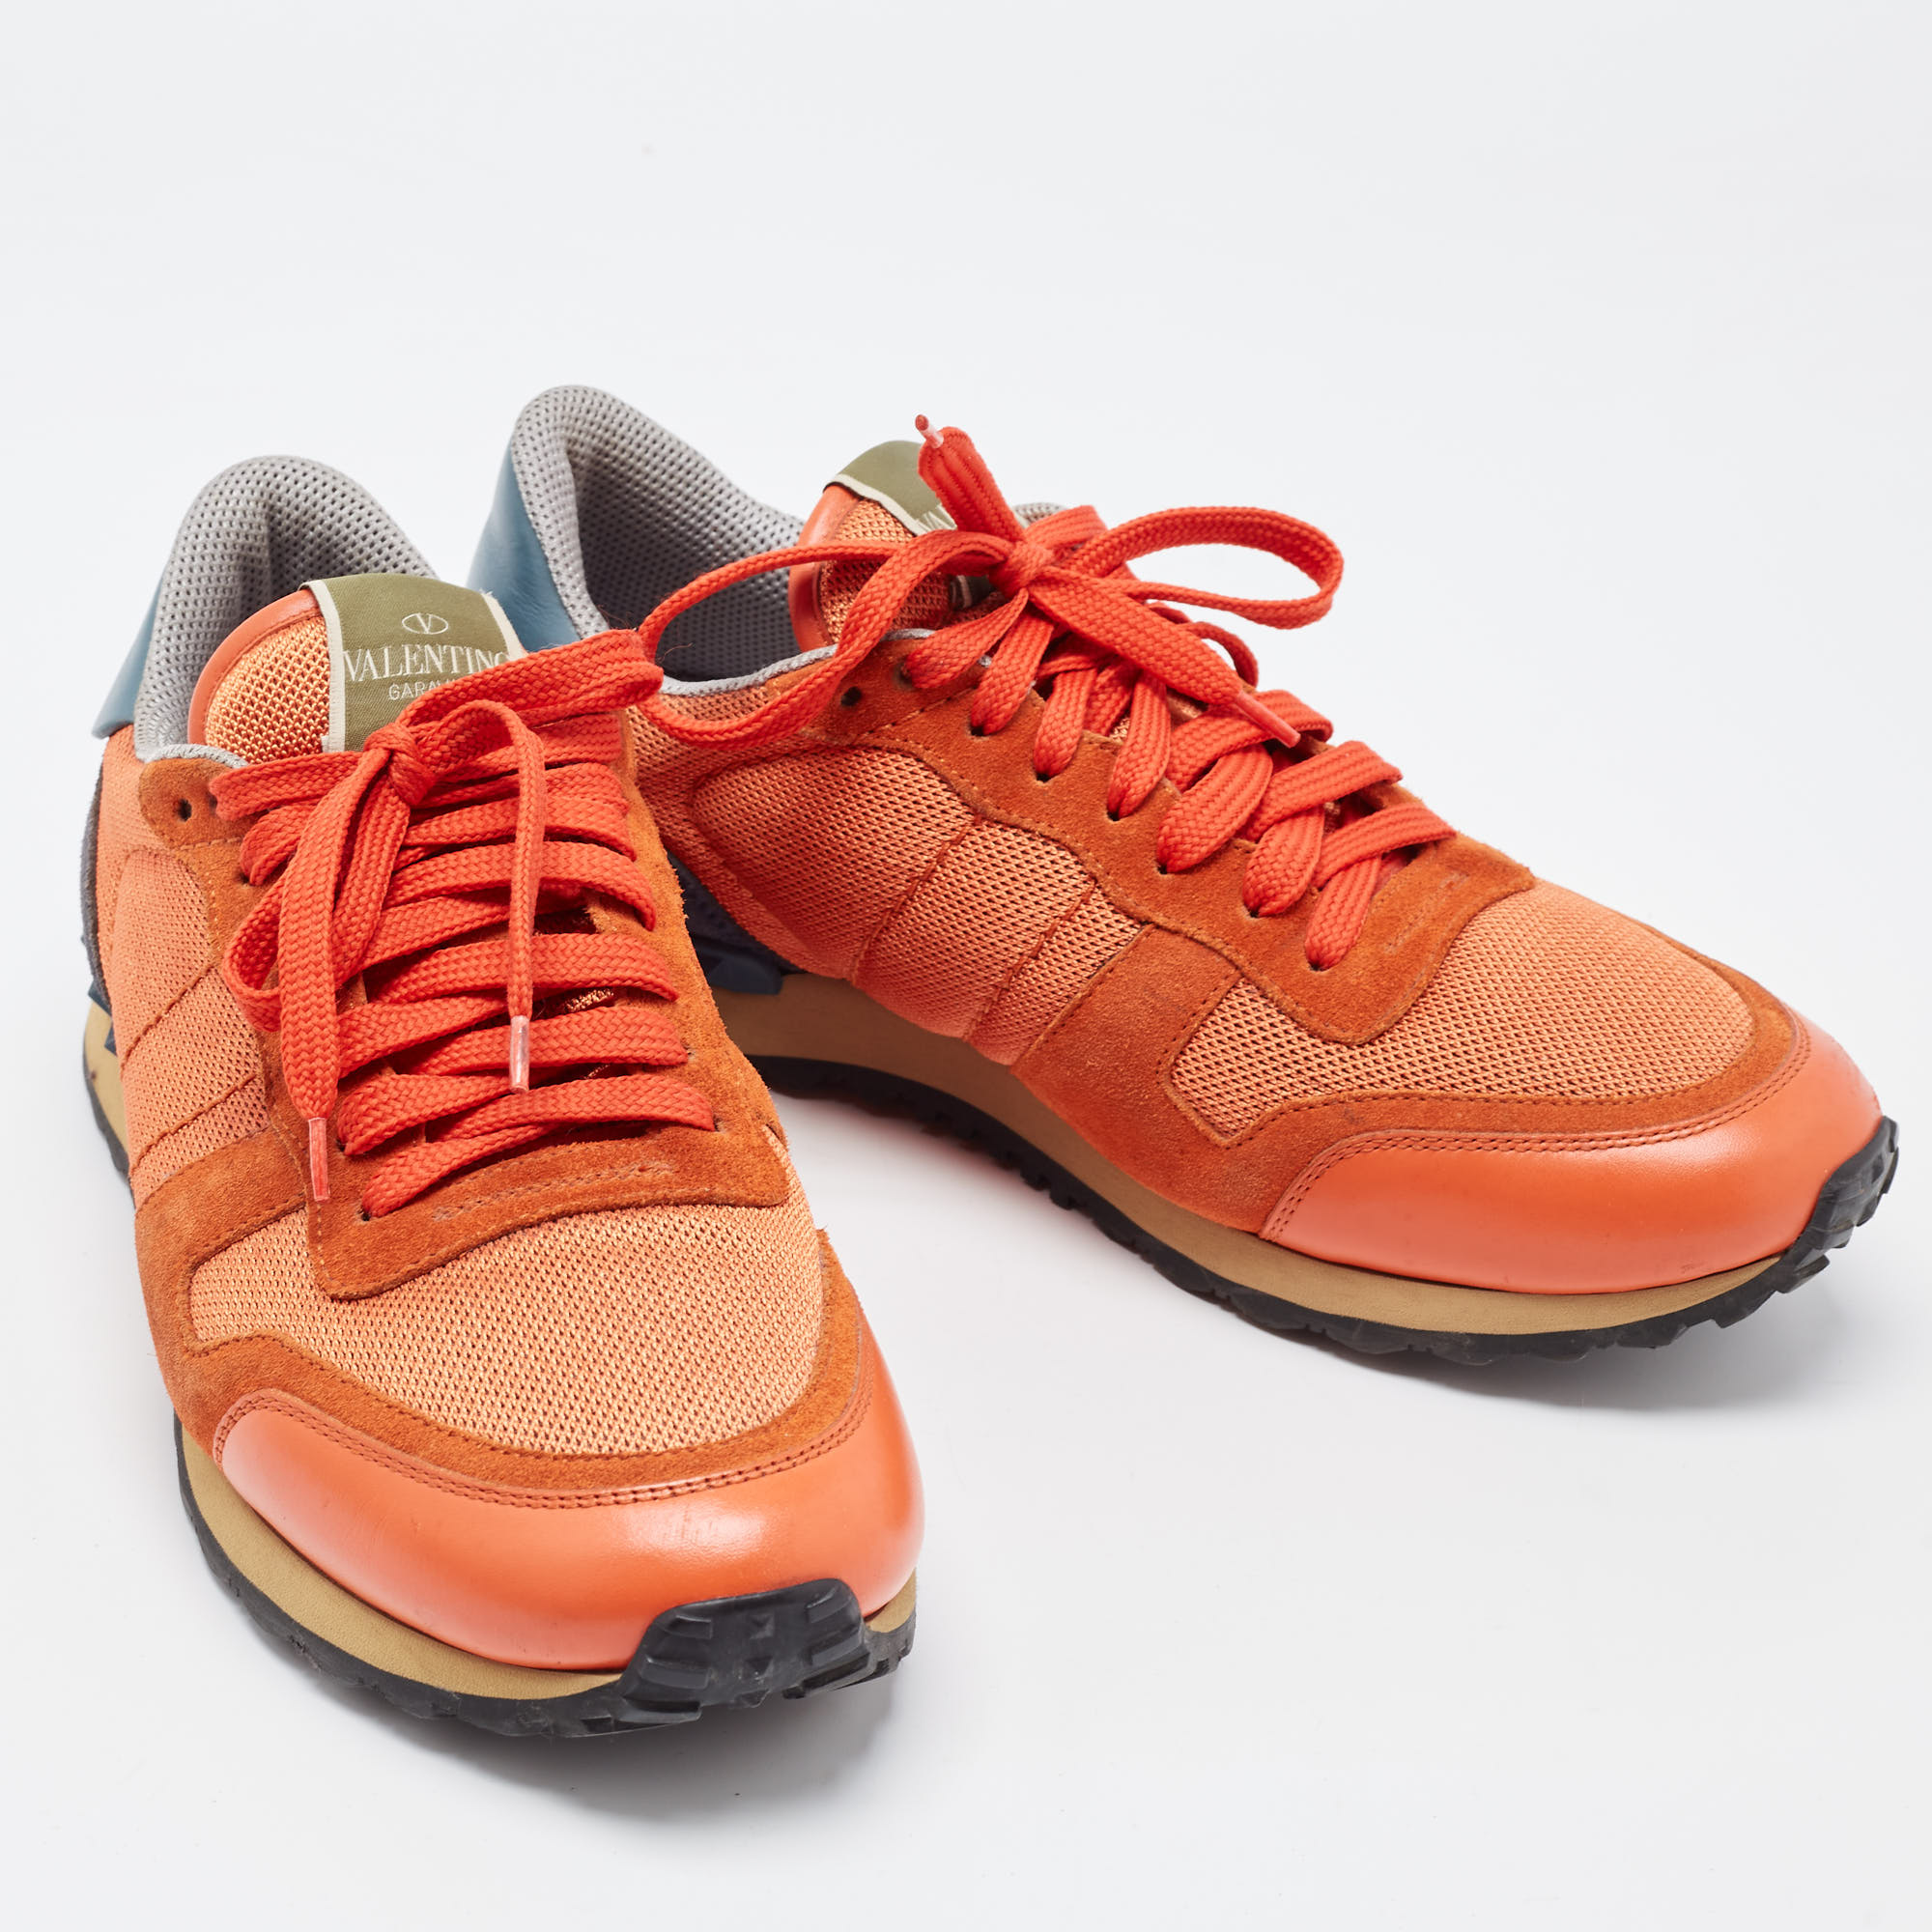 Valentino Orange Leather And Mesh Rockrunner Sneakers Size 41